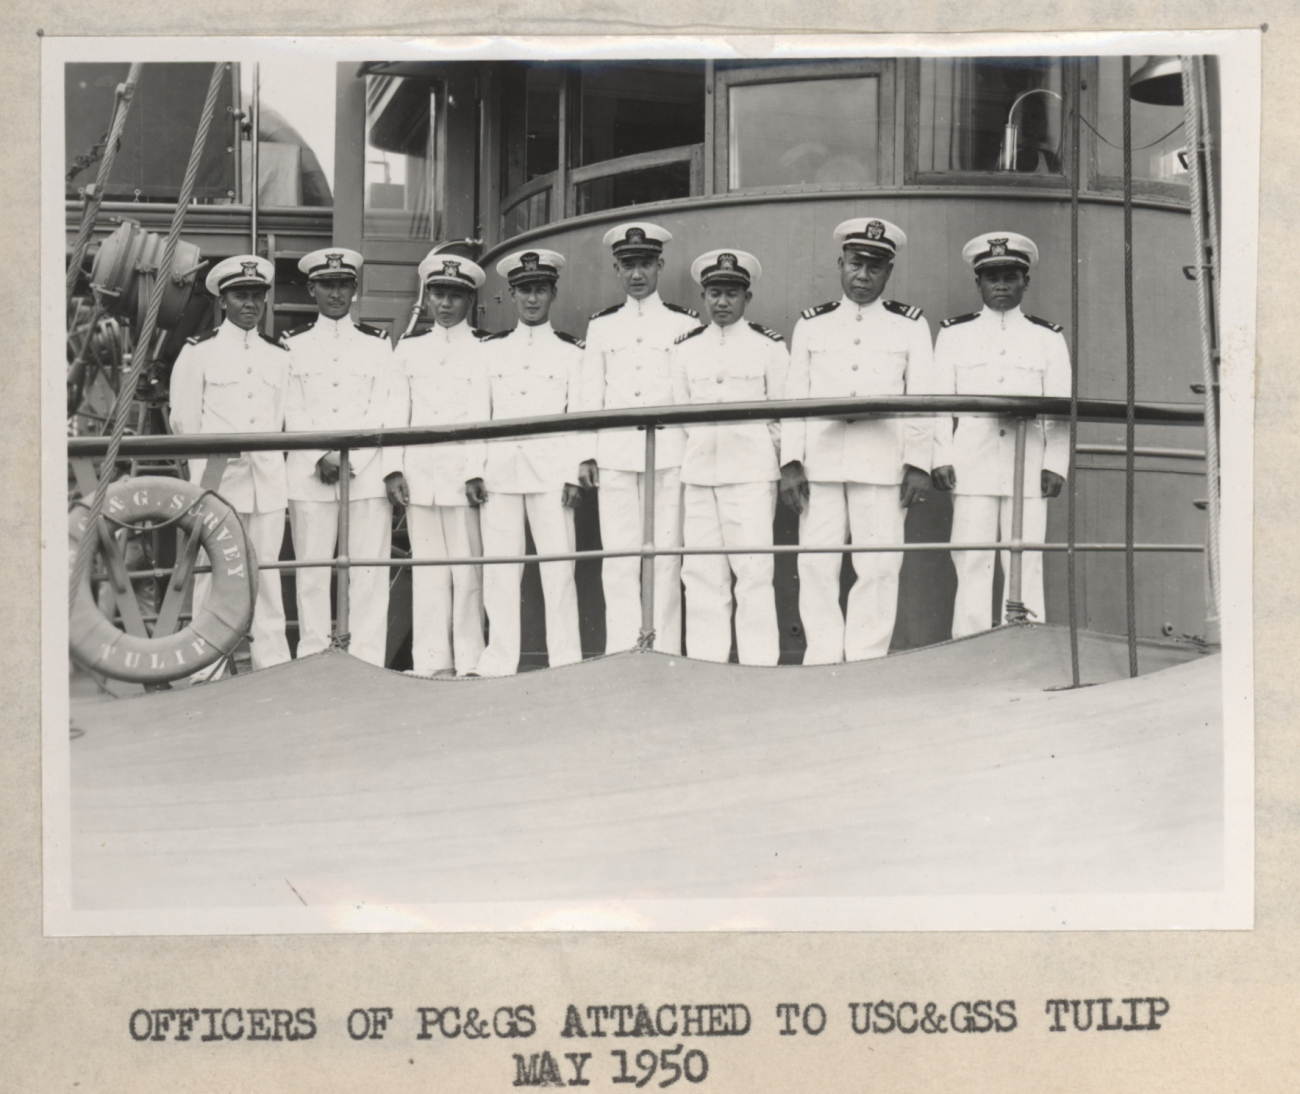 Philippine Coast and Geodetic Survey officers attached to USC&GS; Ship TULIP